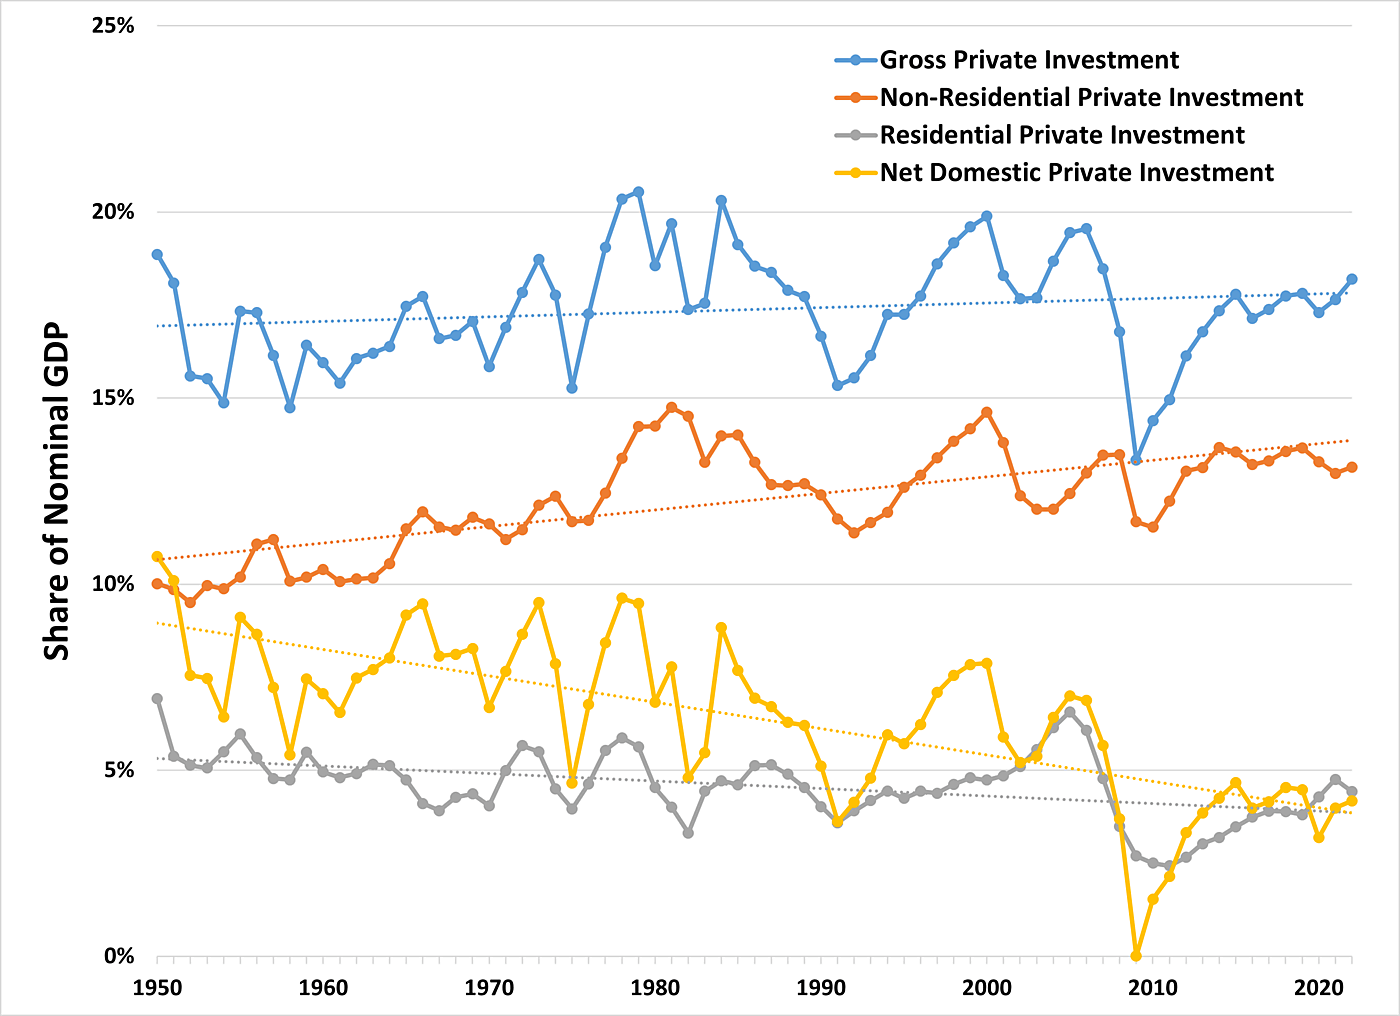 Investment Share of GDP